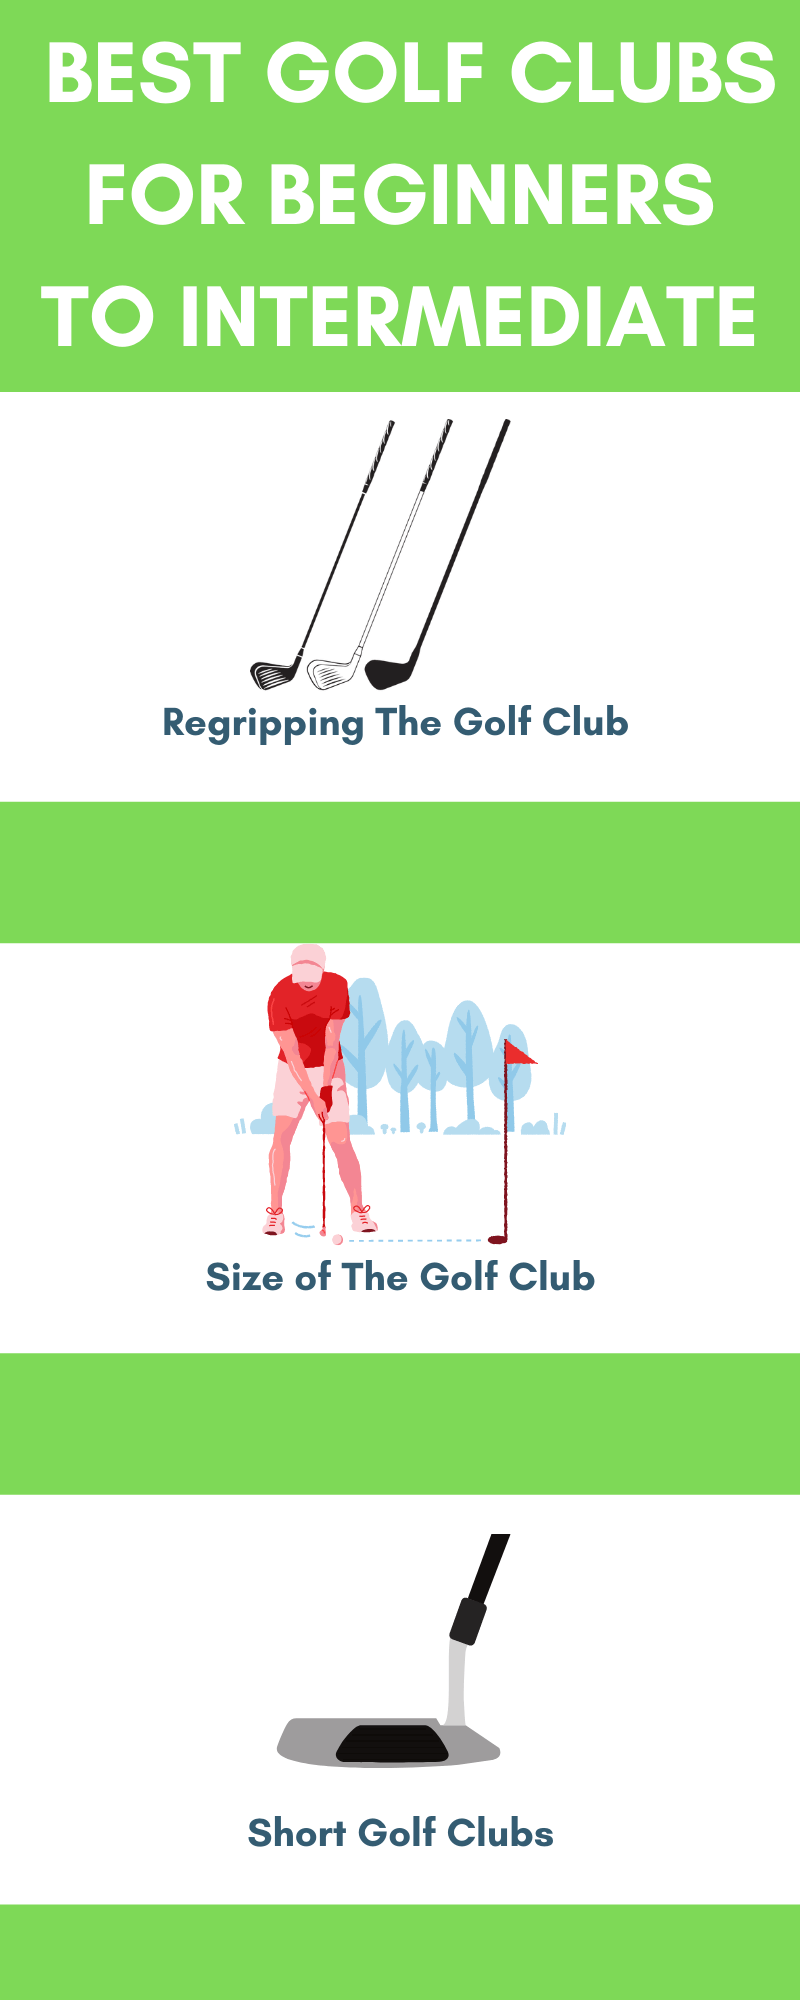 best golf clubs for beginners to intermediates